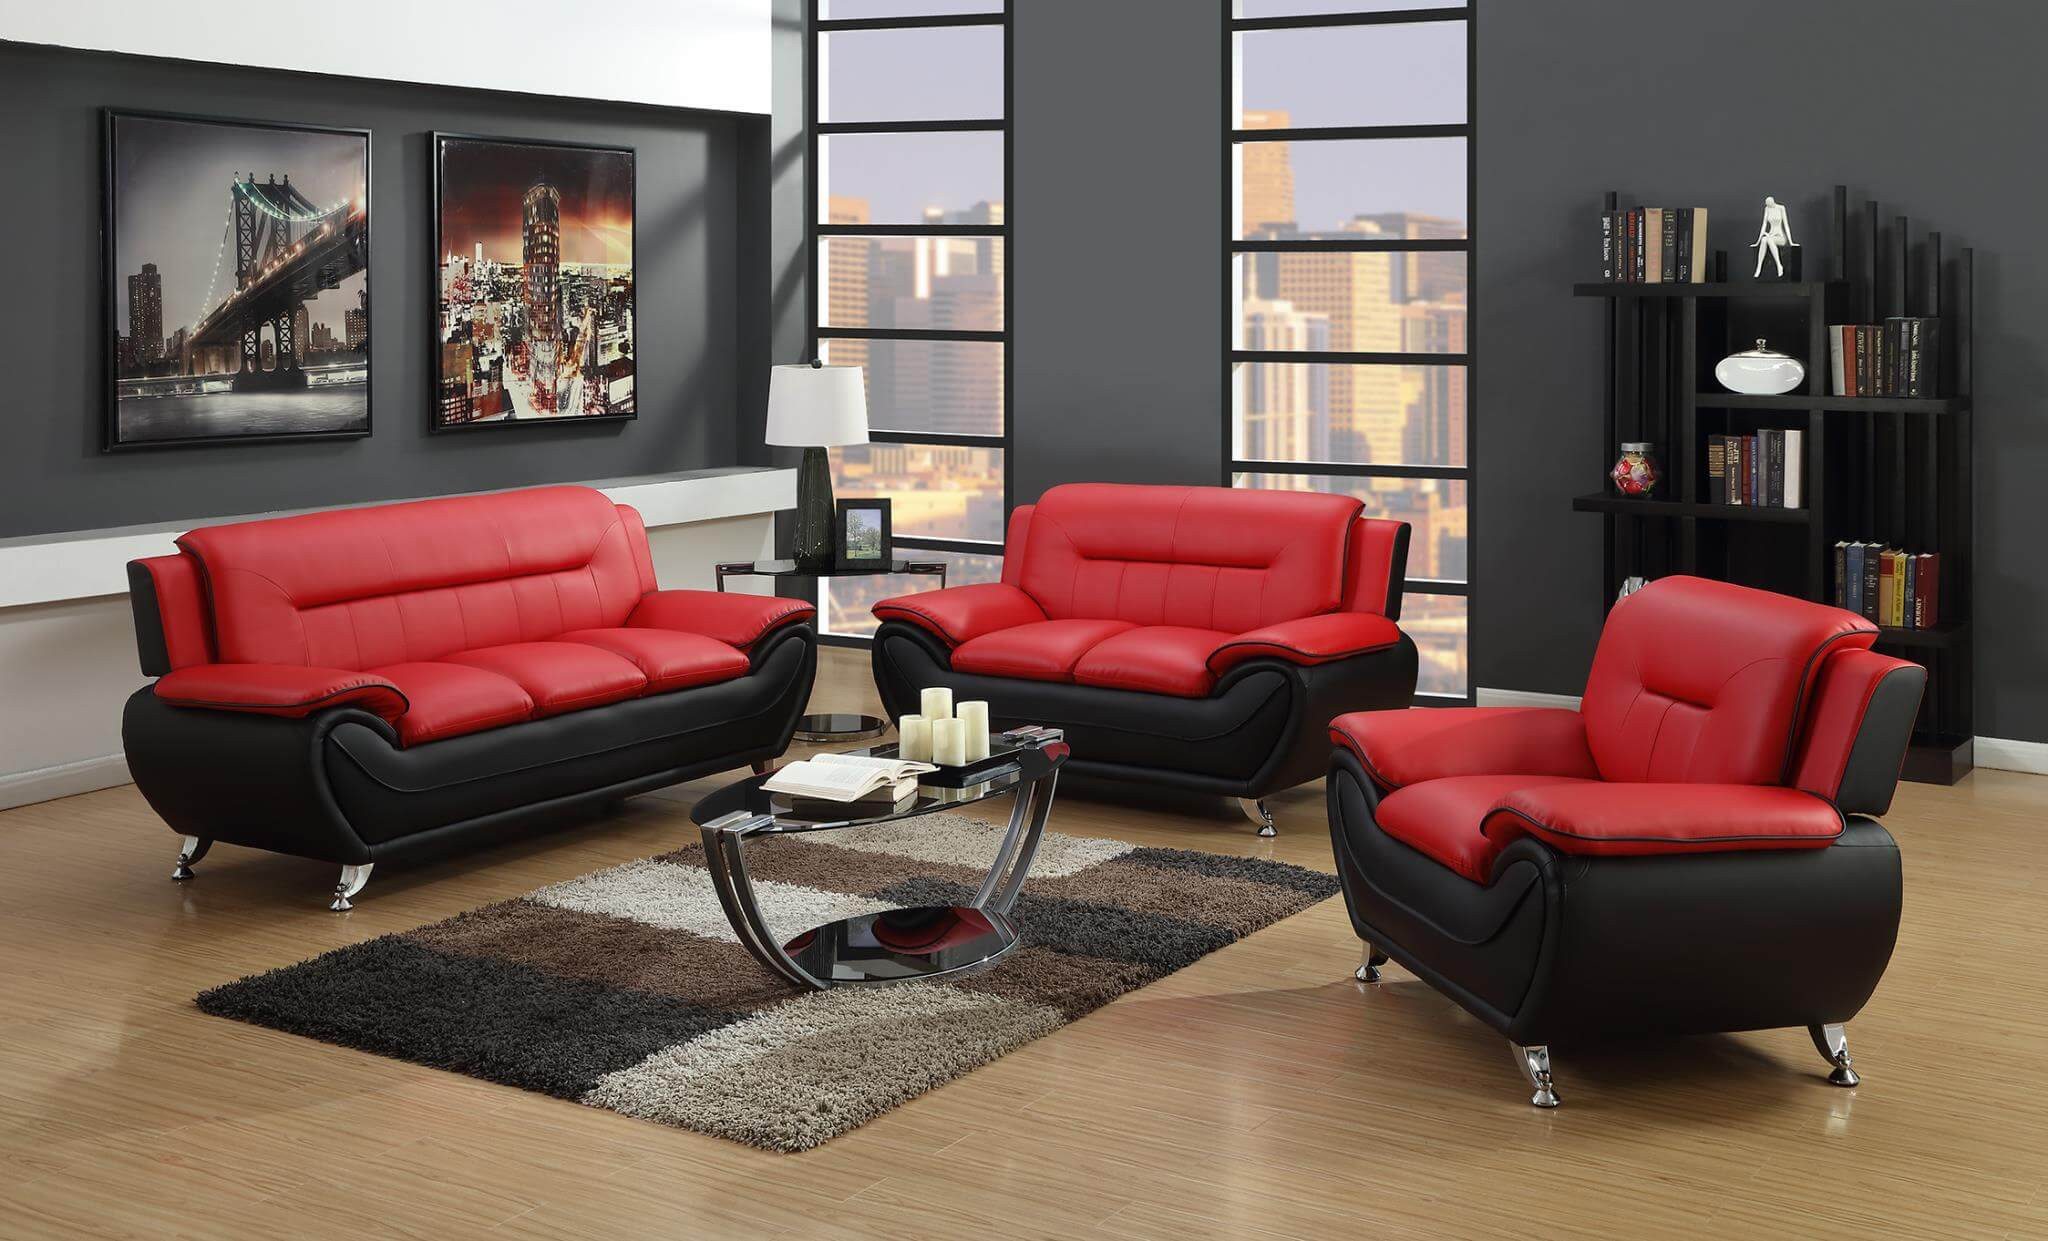 Red Living Room Chairs
 Red and Black Living Room Set